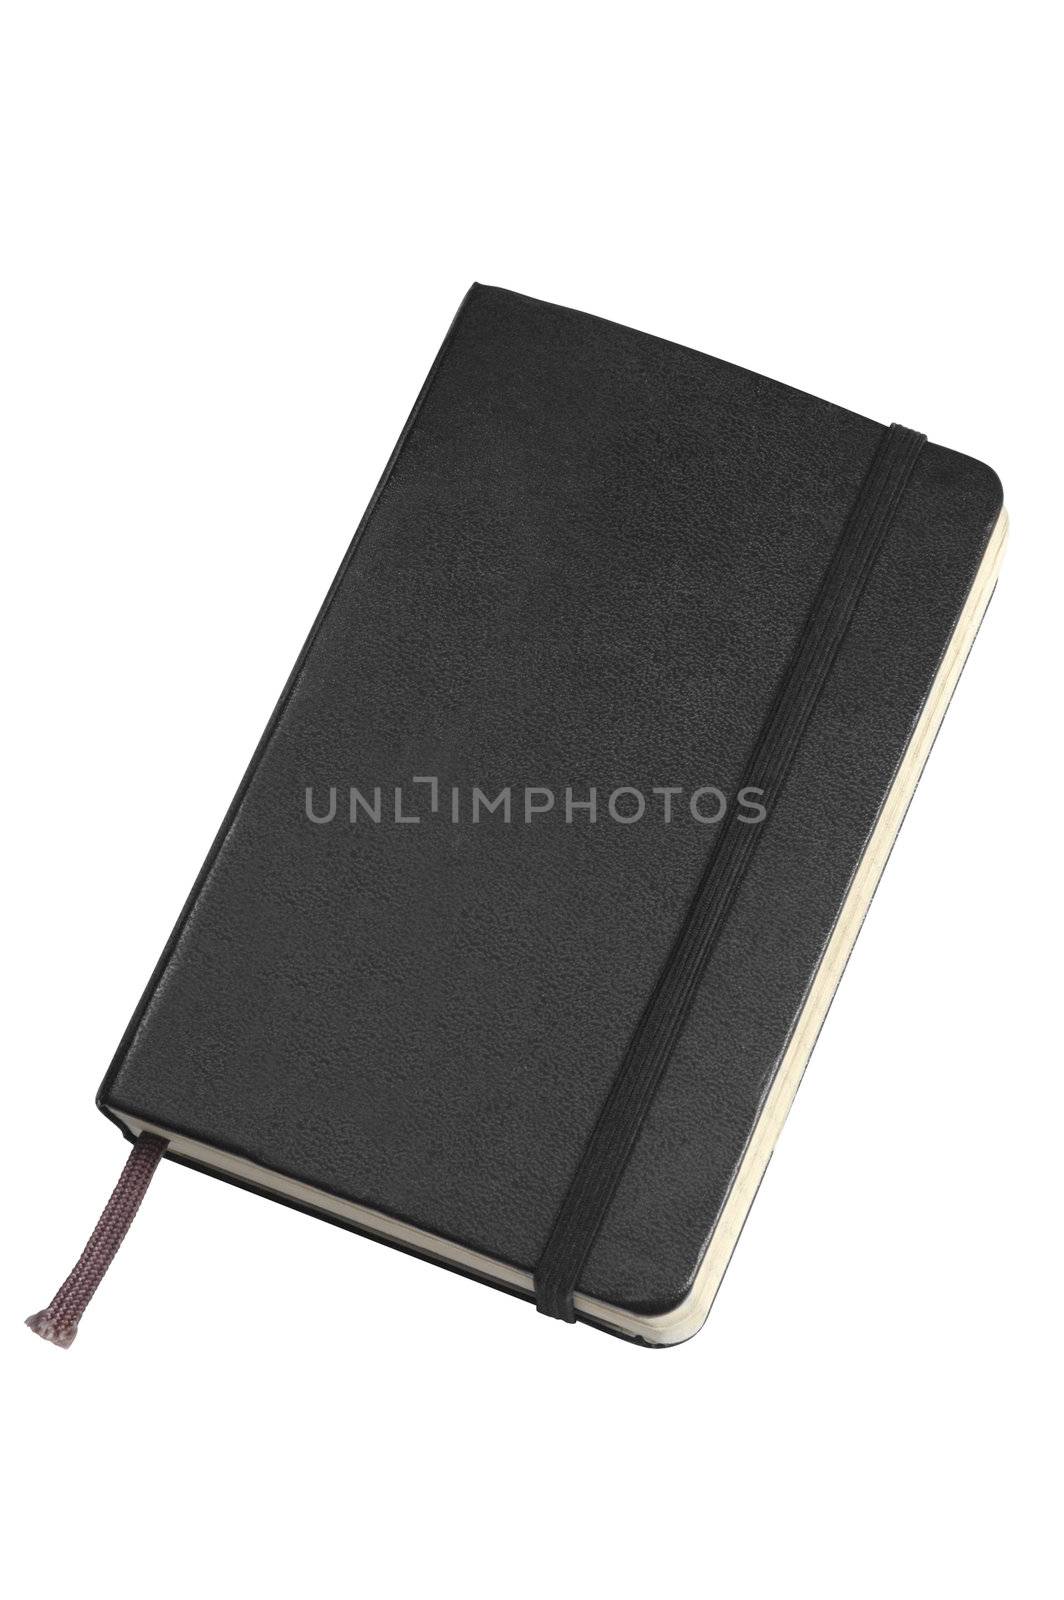 Little black book by nahhan